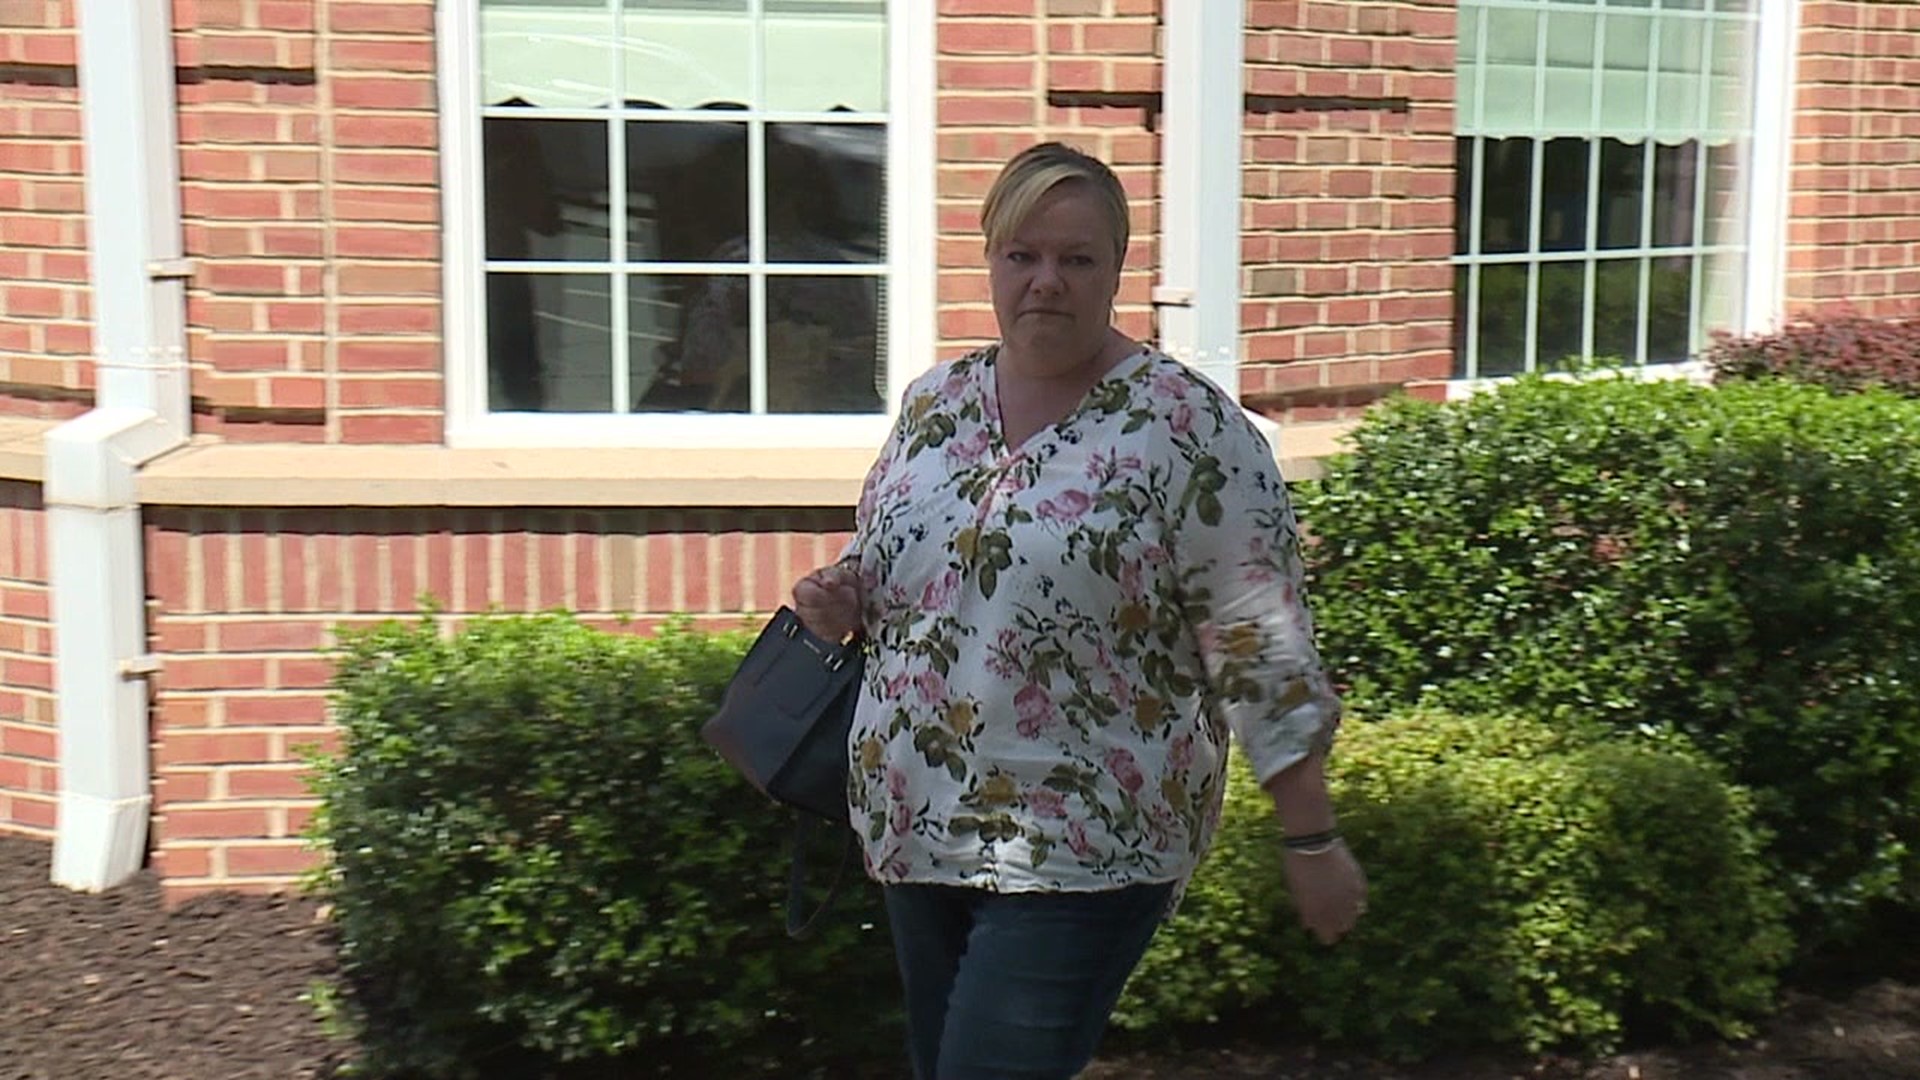 In December, Linda Fauquier pleaded guilty to taking money from Lackawanna Trail's Booster Club.